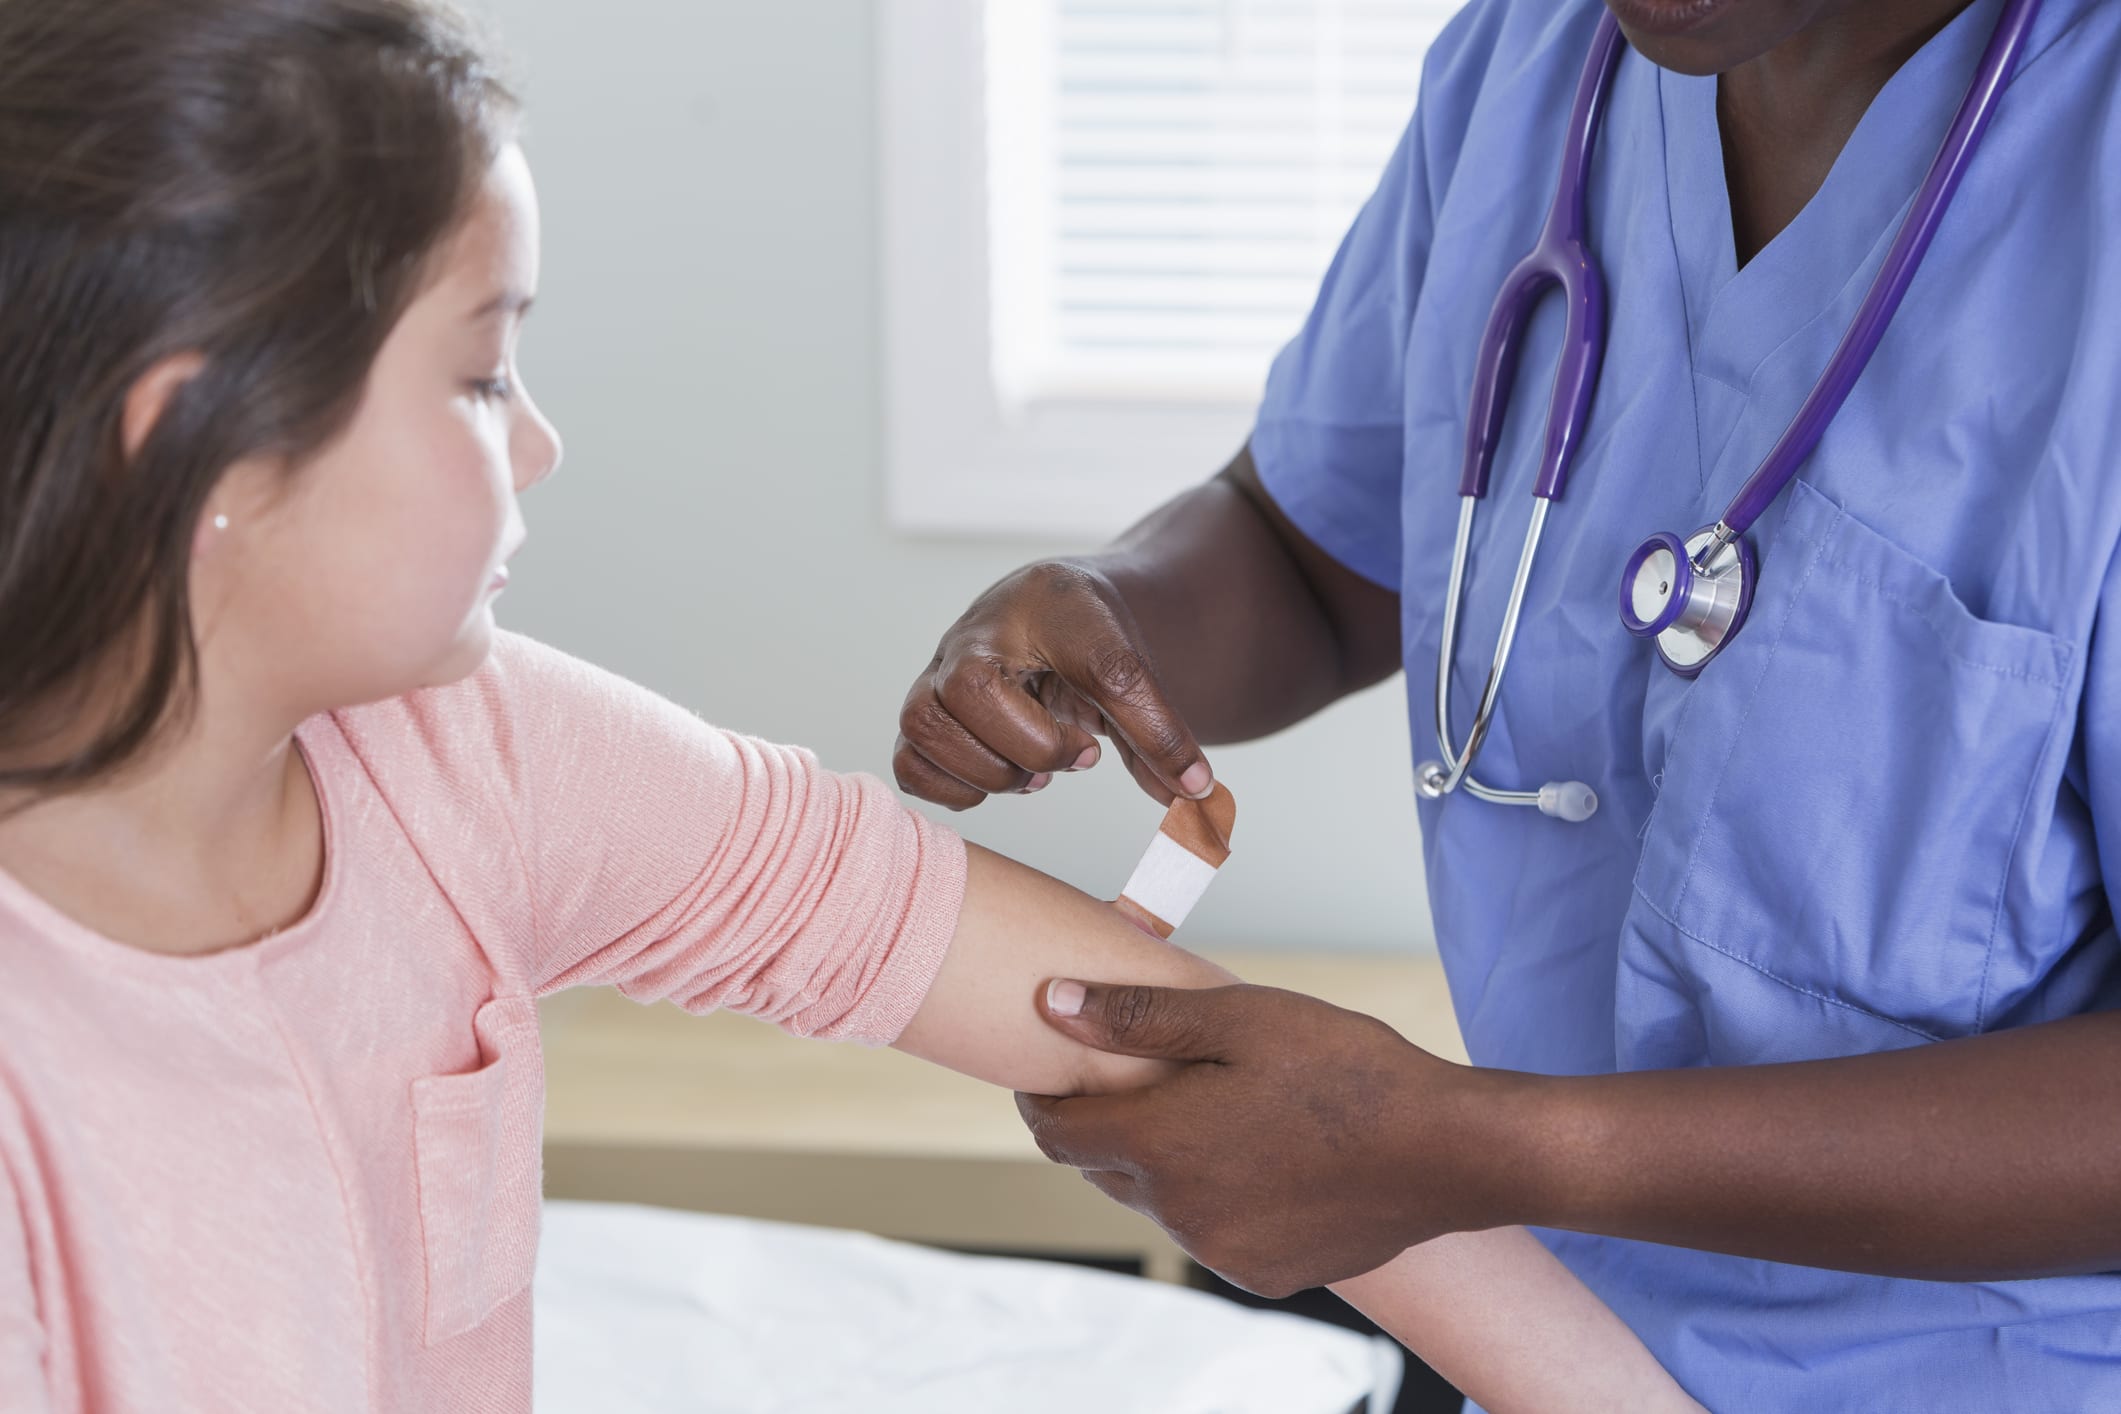 Cropped view of a female doctor or nurse smiling at the camera as she puts an adhesive bandage on the arm of her young patient, a 9 year old girl.